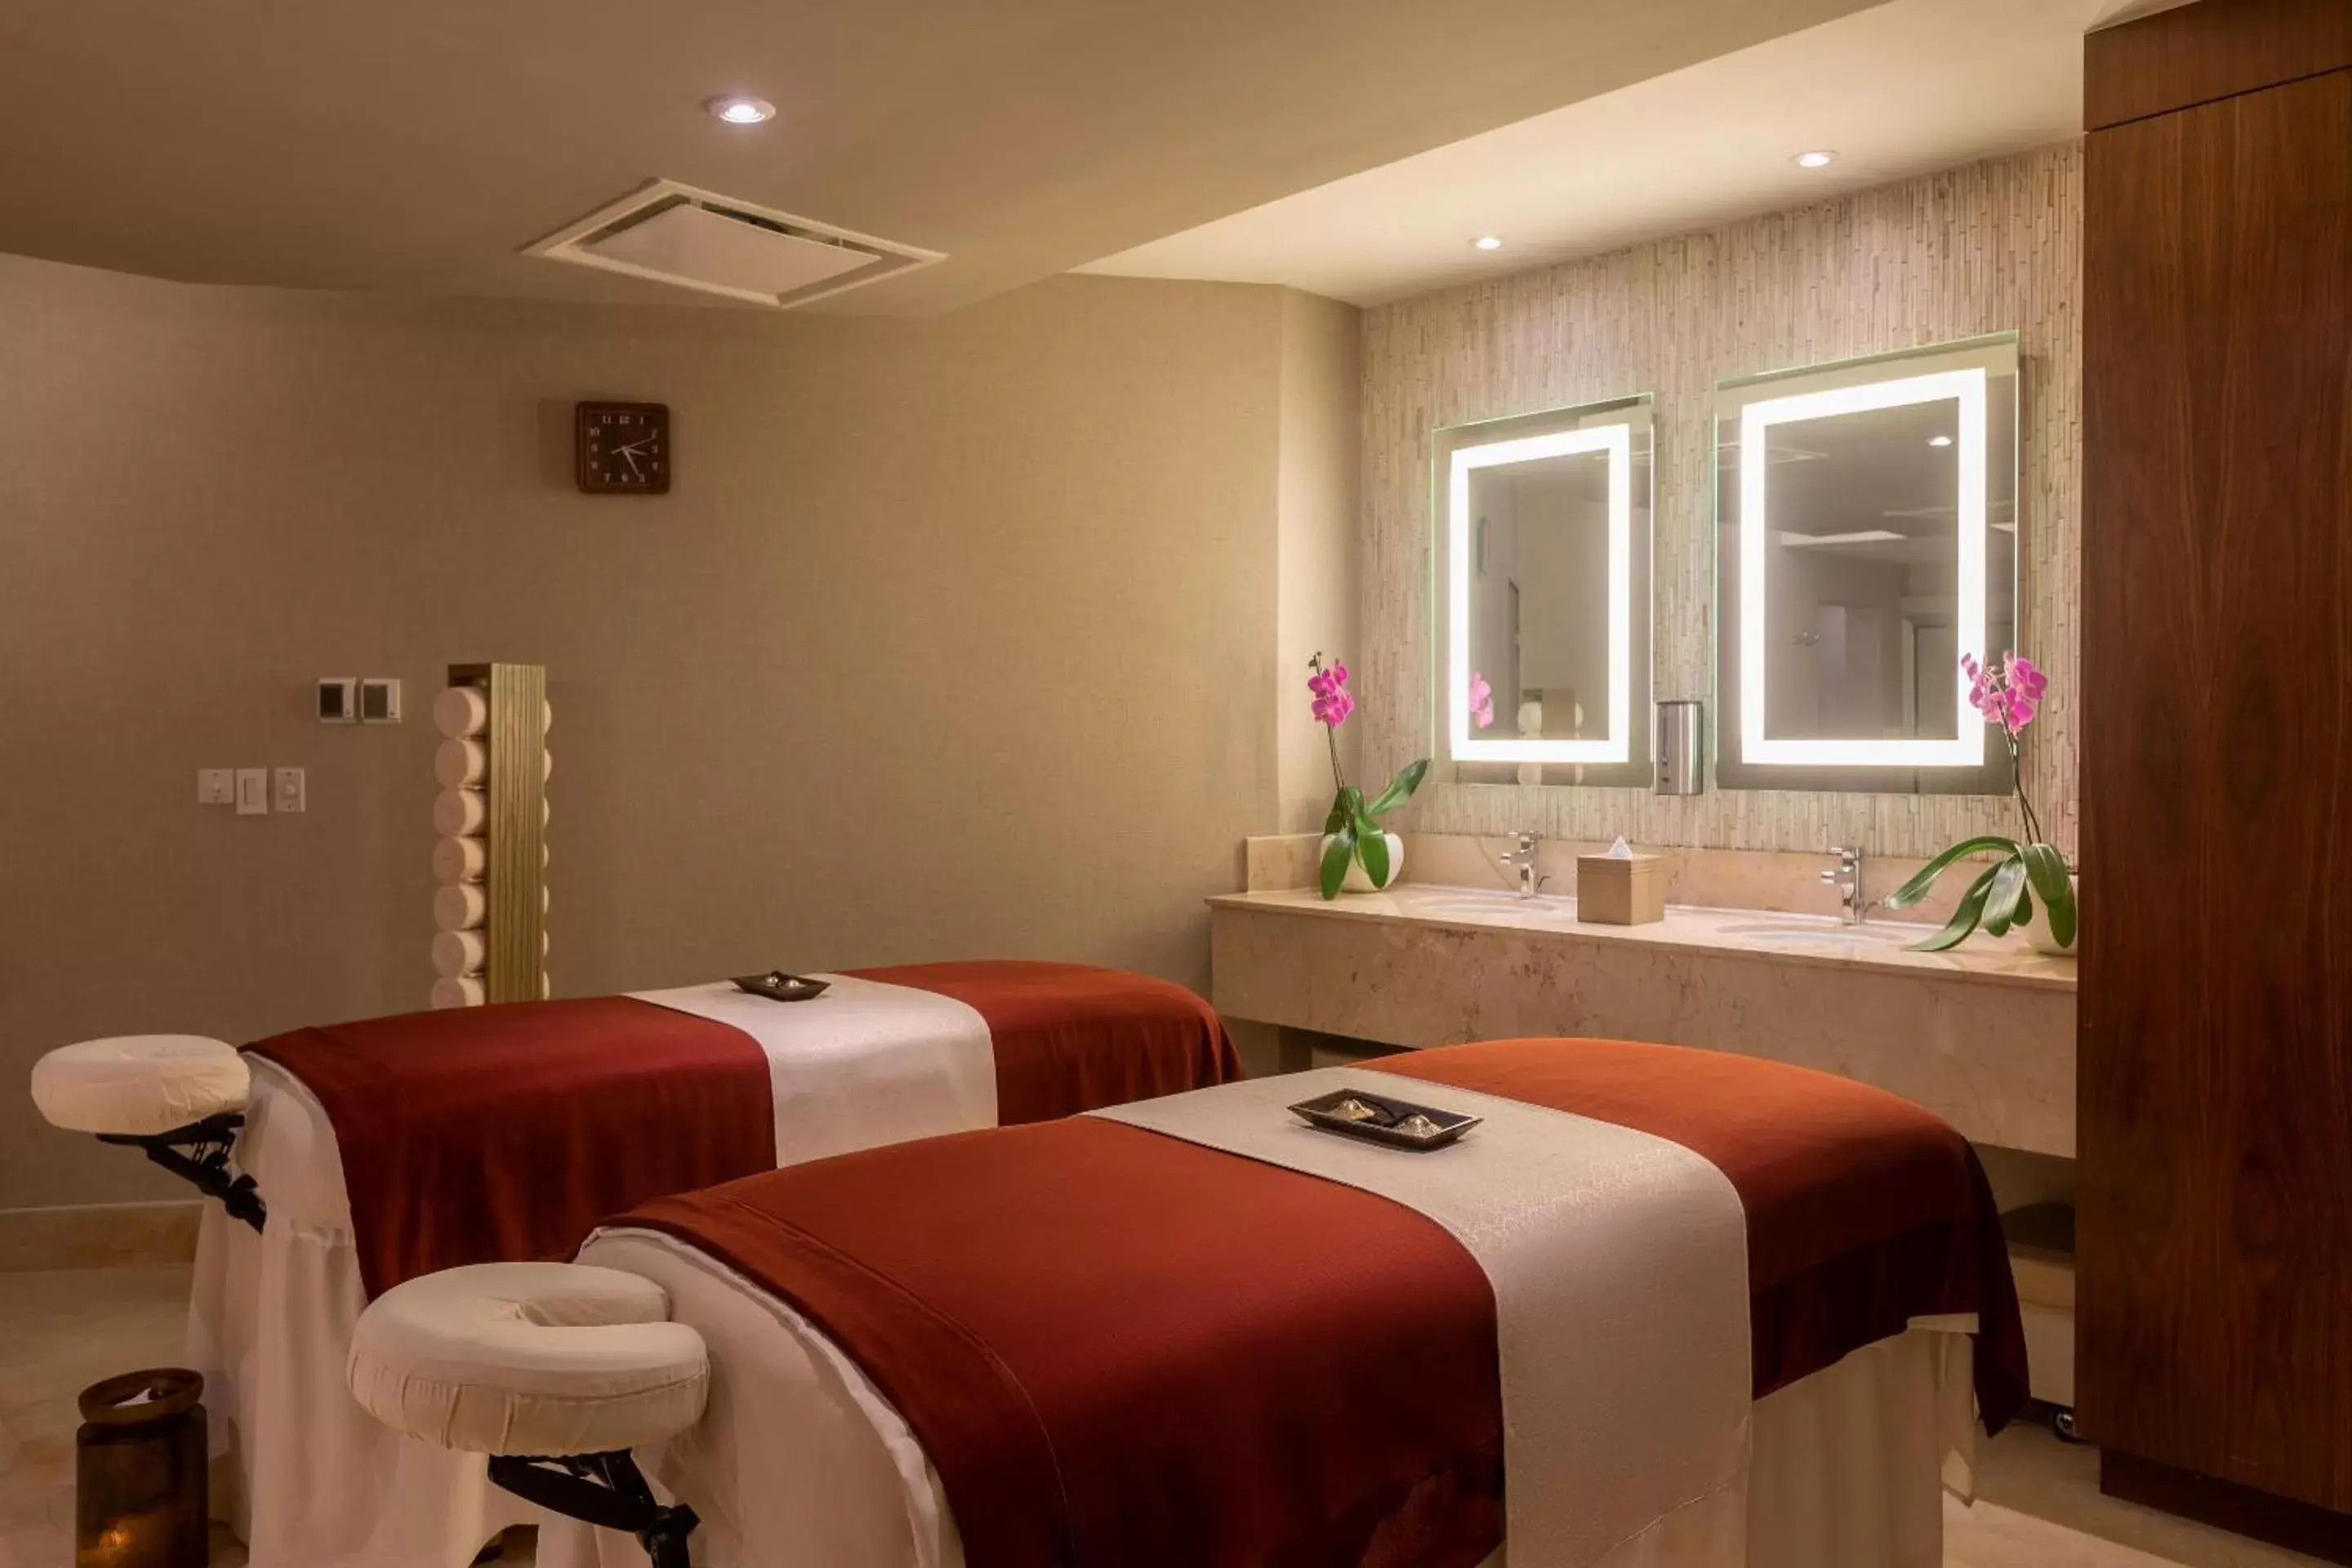 Spa and wellness centre/facilities in Moon Palace Jamaica